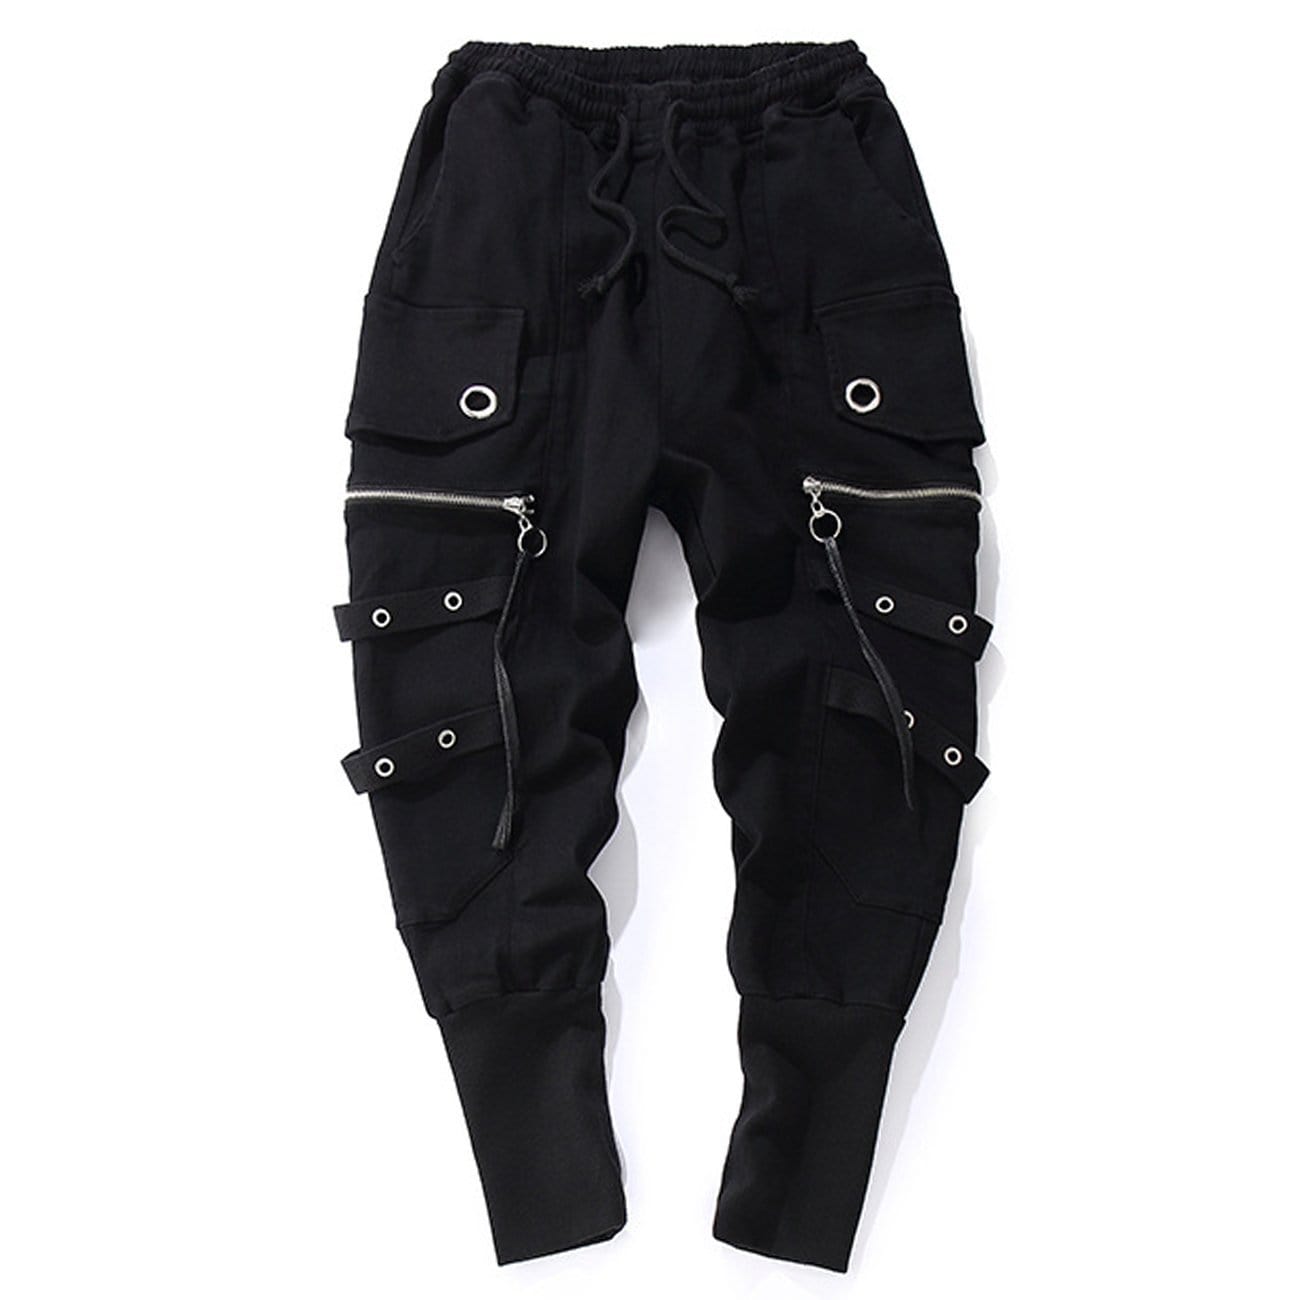 TO Zippers Multi Pockets Ring Pants